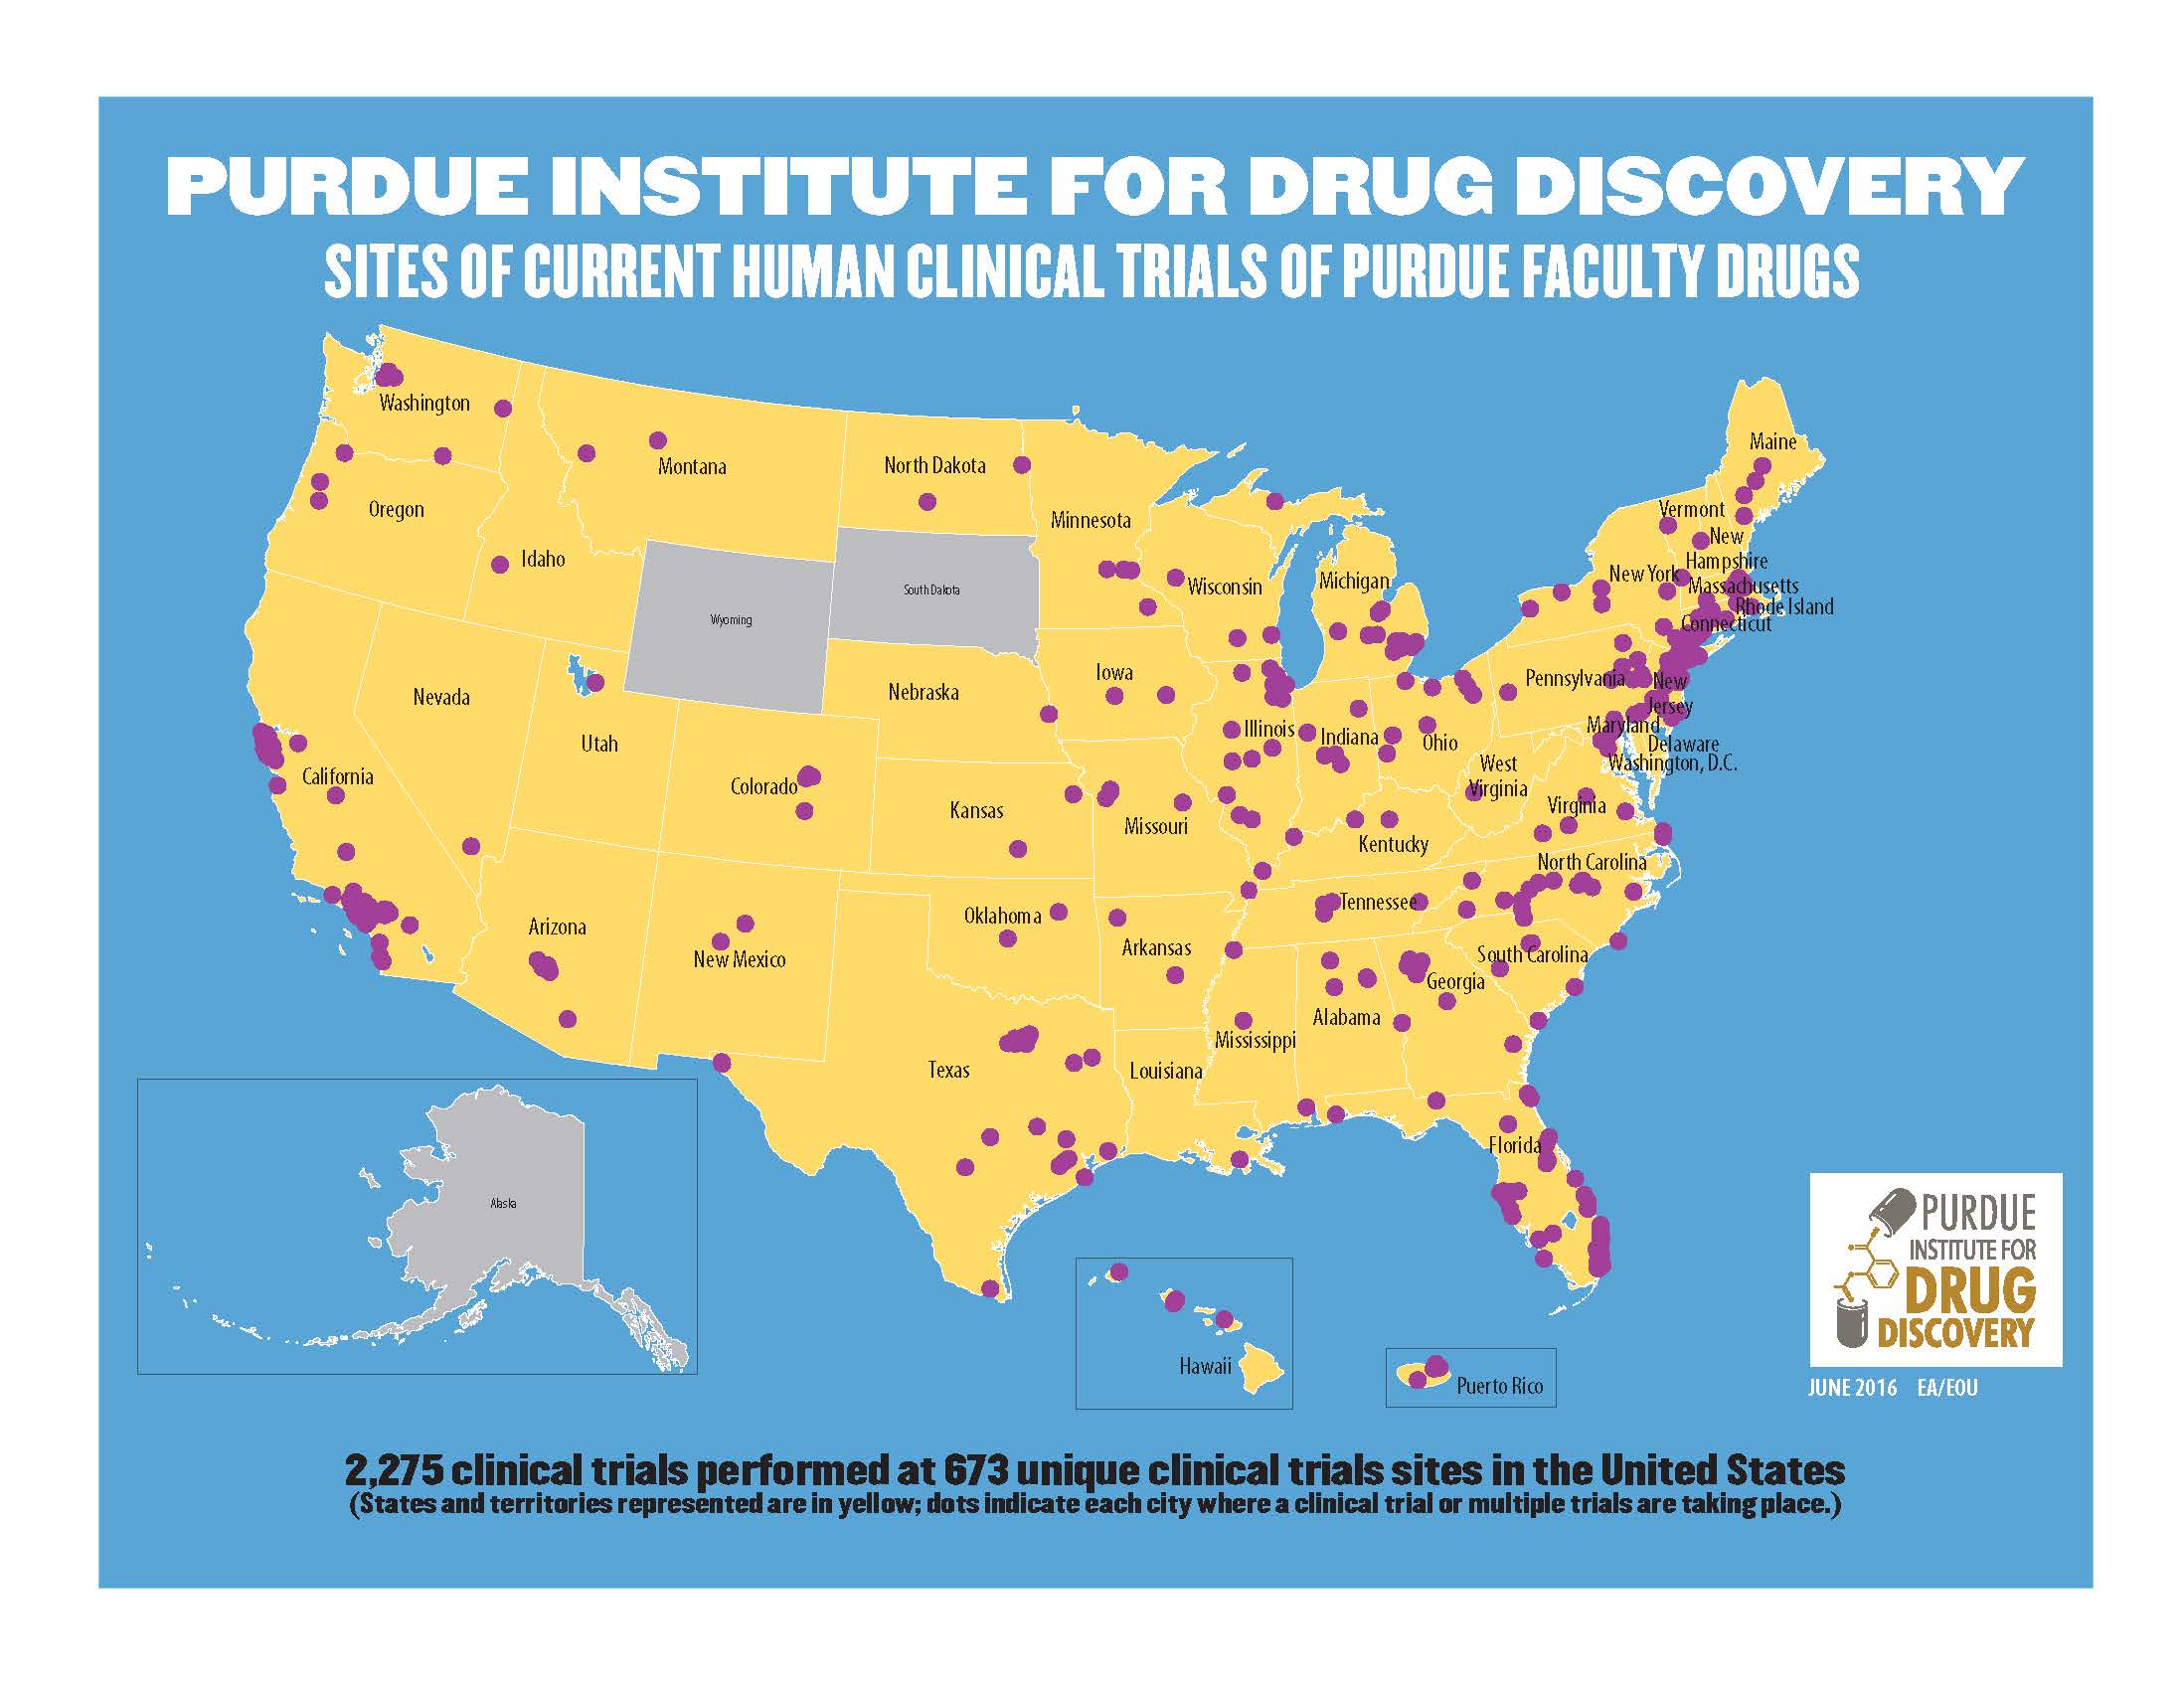 Purdue Institute for Drug Discovery. Sites of Current Human Clinical Trials of Purdue Faculty Drugs. 2,275
			clinical trials performed at 673 unique clinical trials sites in the United States. (States and territories represented are in yellow; data indicate each city where a clinical trial or multiple trials are taking place.)